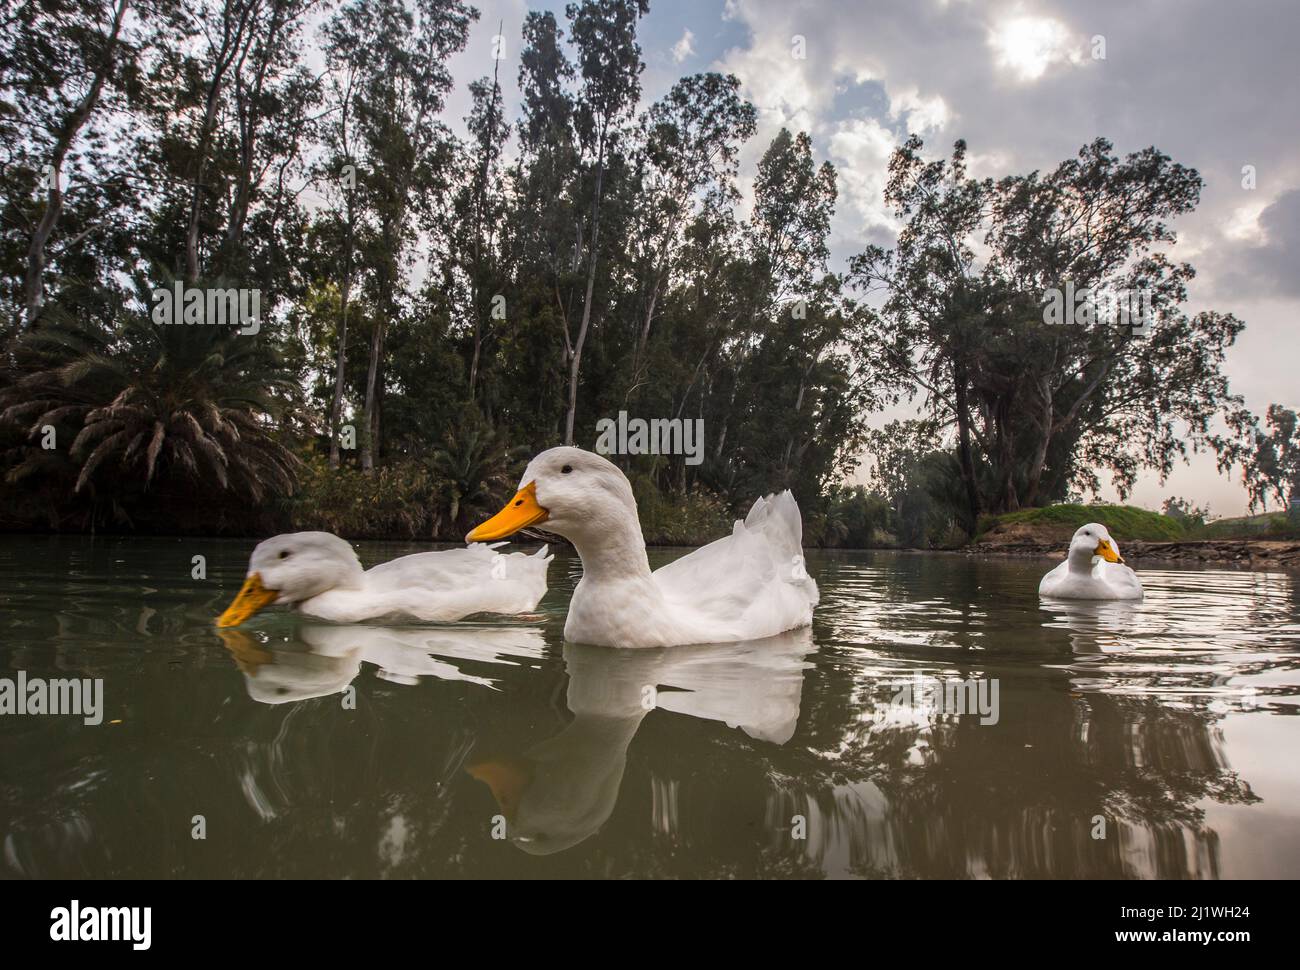 Ducks swimming in a pond Stock Photo